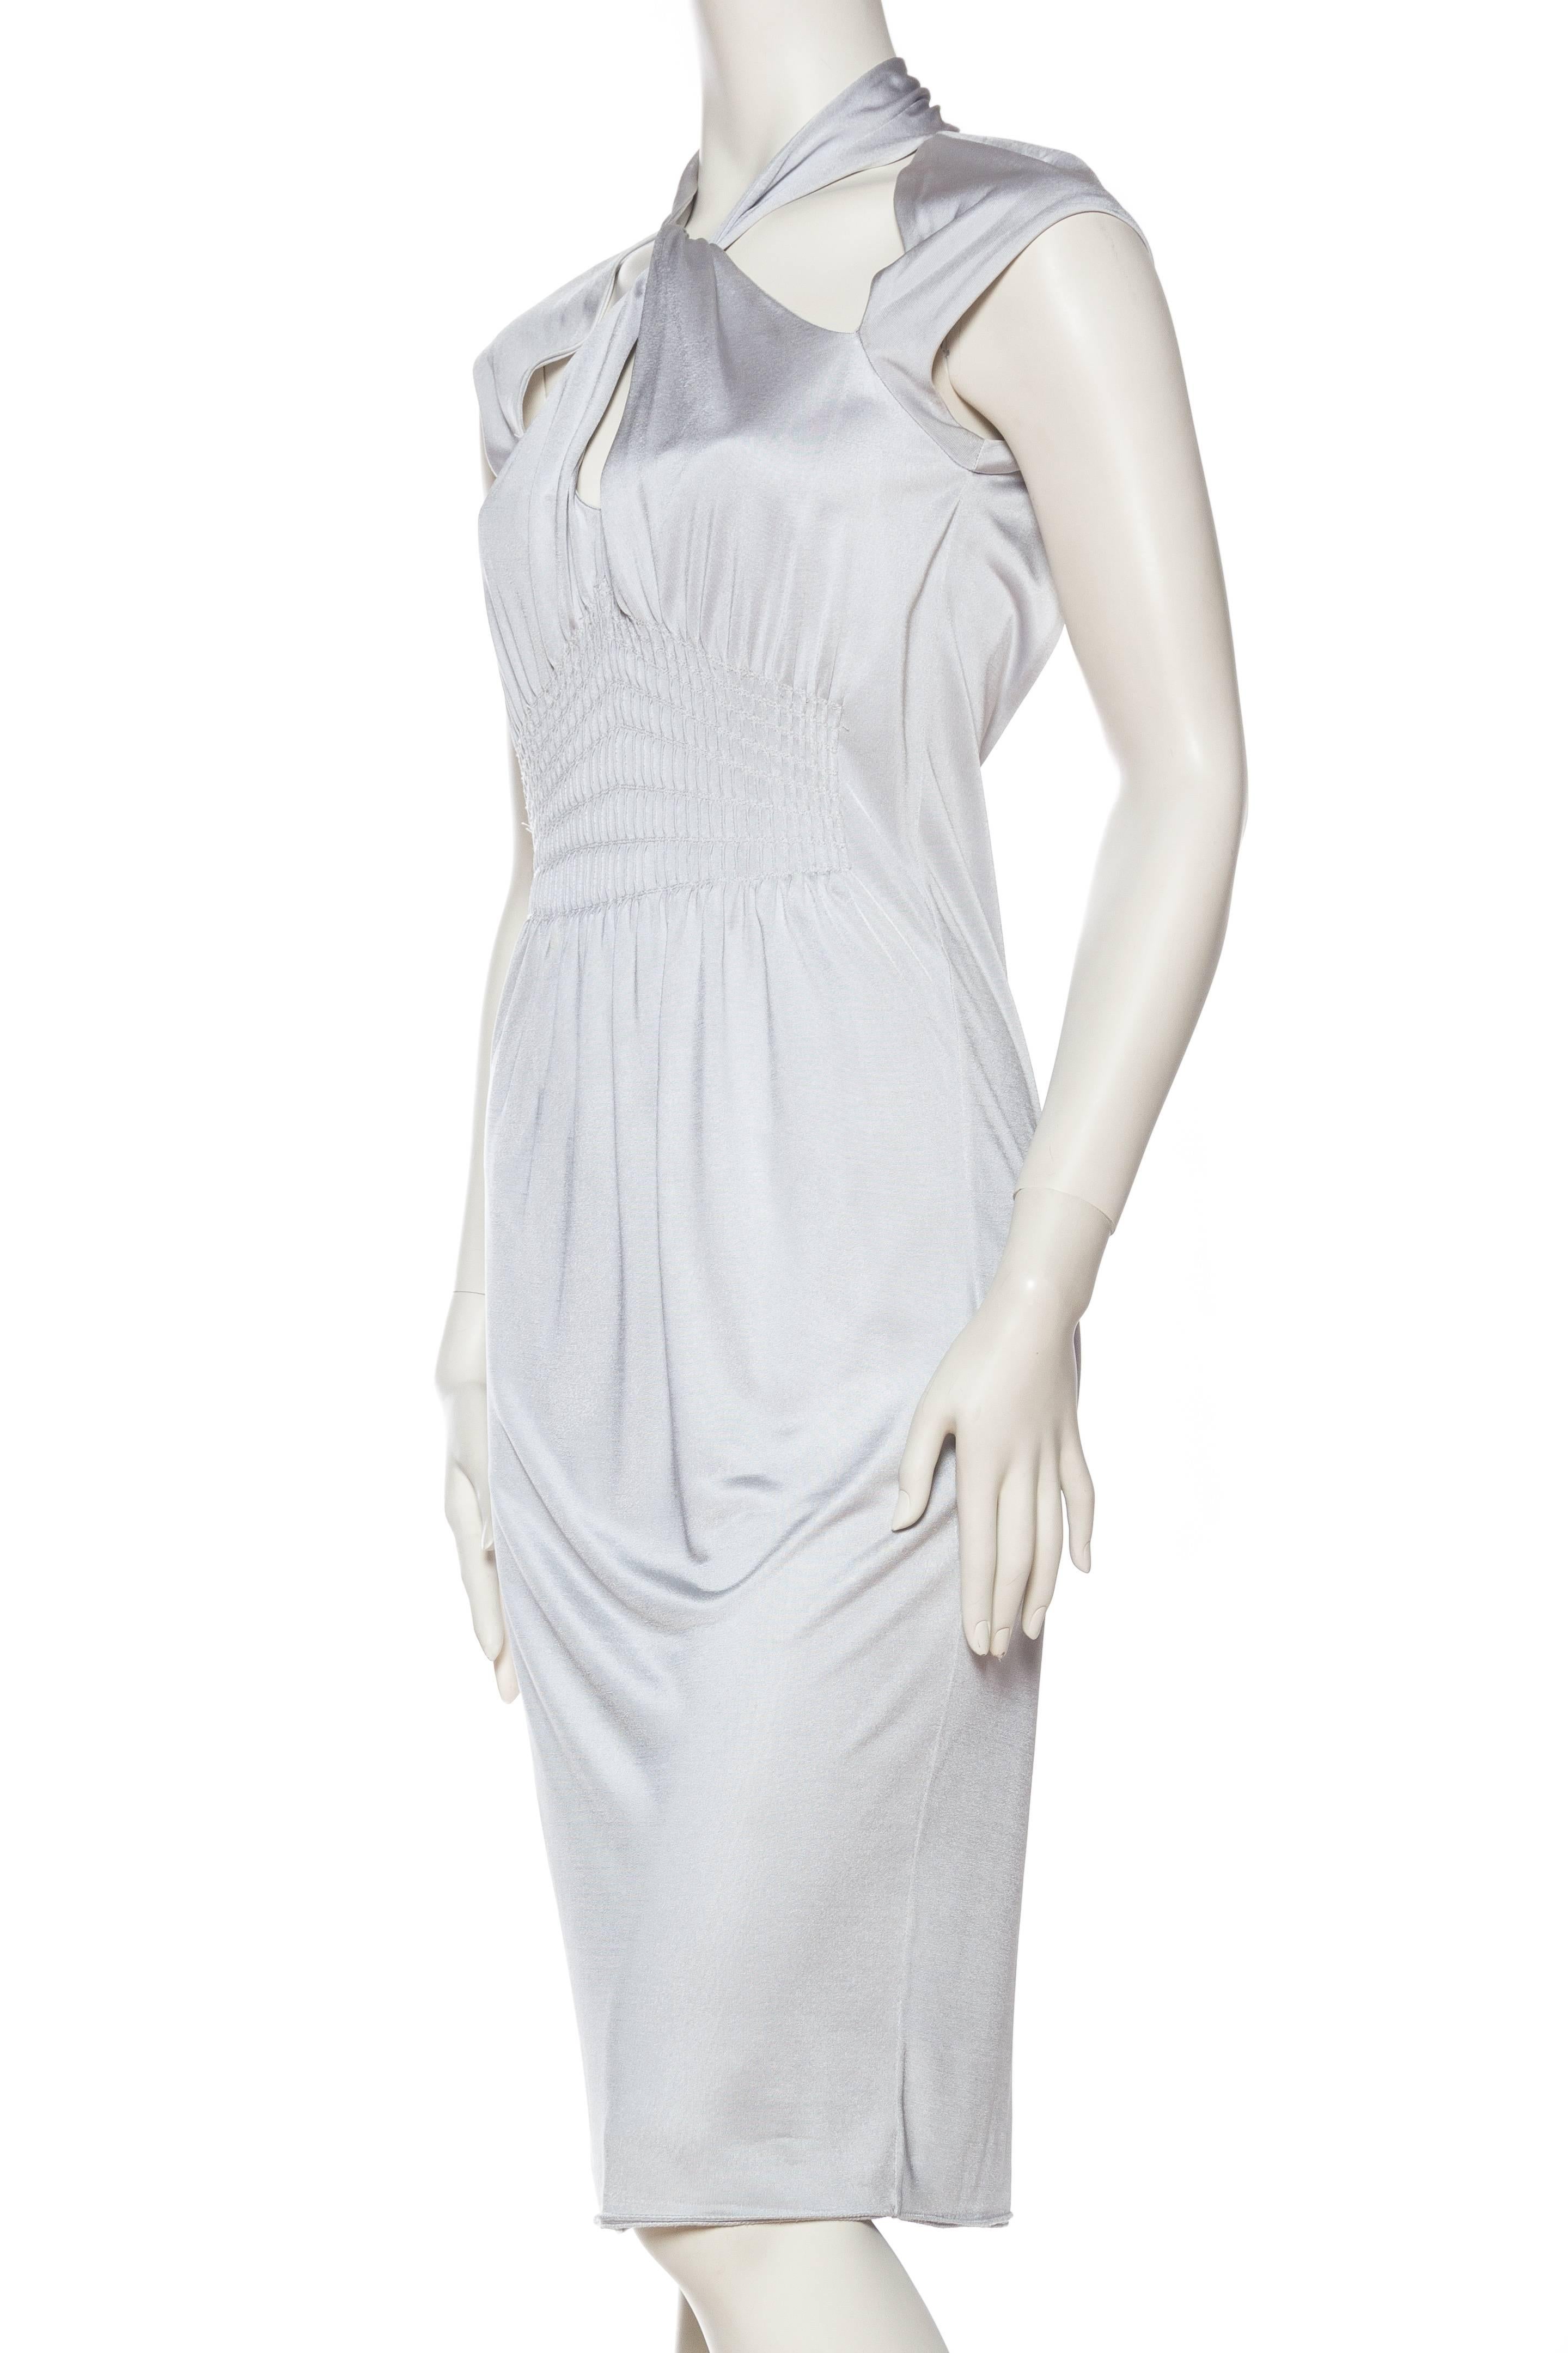 2000S TOM FORD GUCCI Dove Grey Rayon Jersey Backless Dress 1